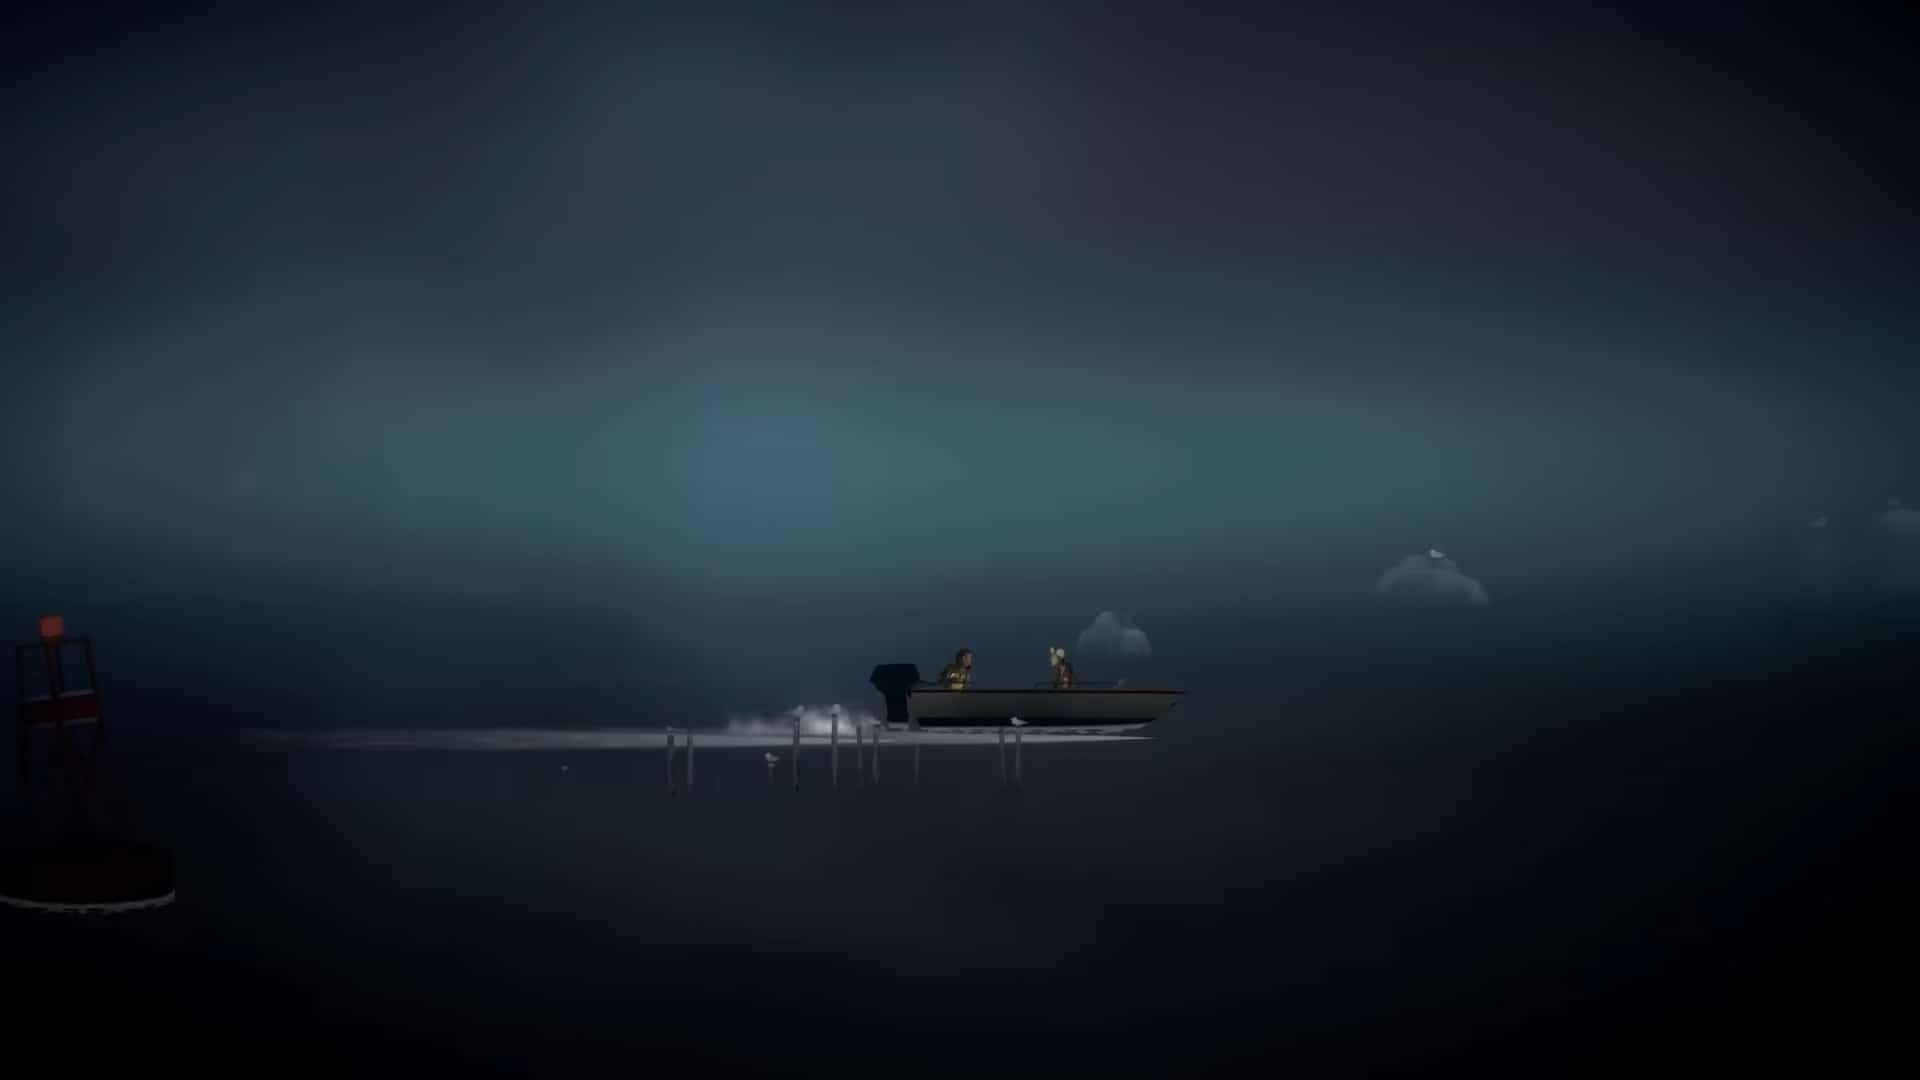 Oxenfree 2 cast and voice actor: Riley and Jacob on a boat in some fog